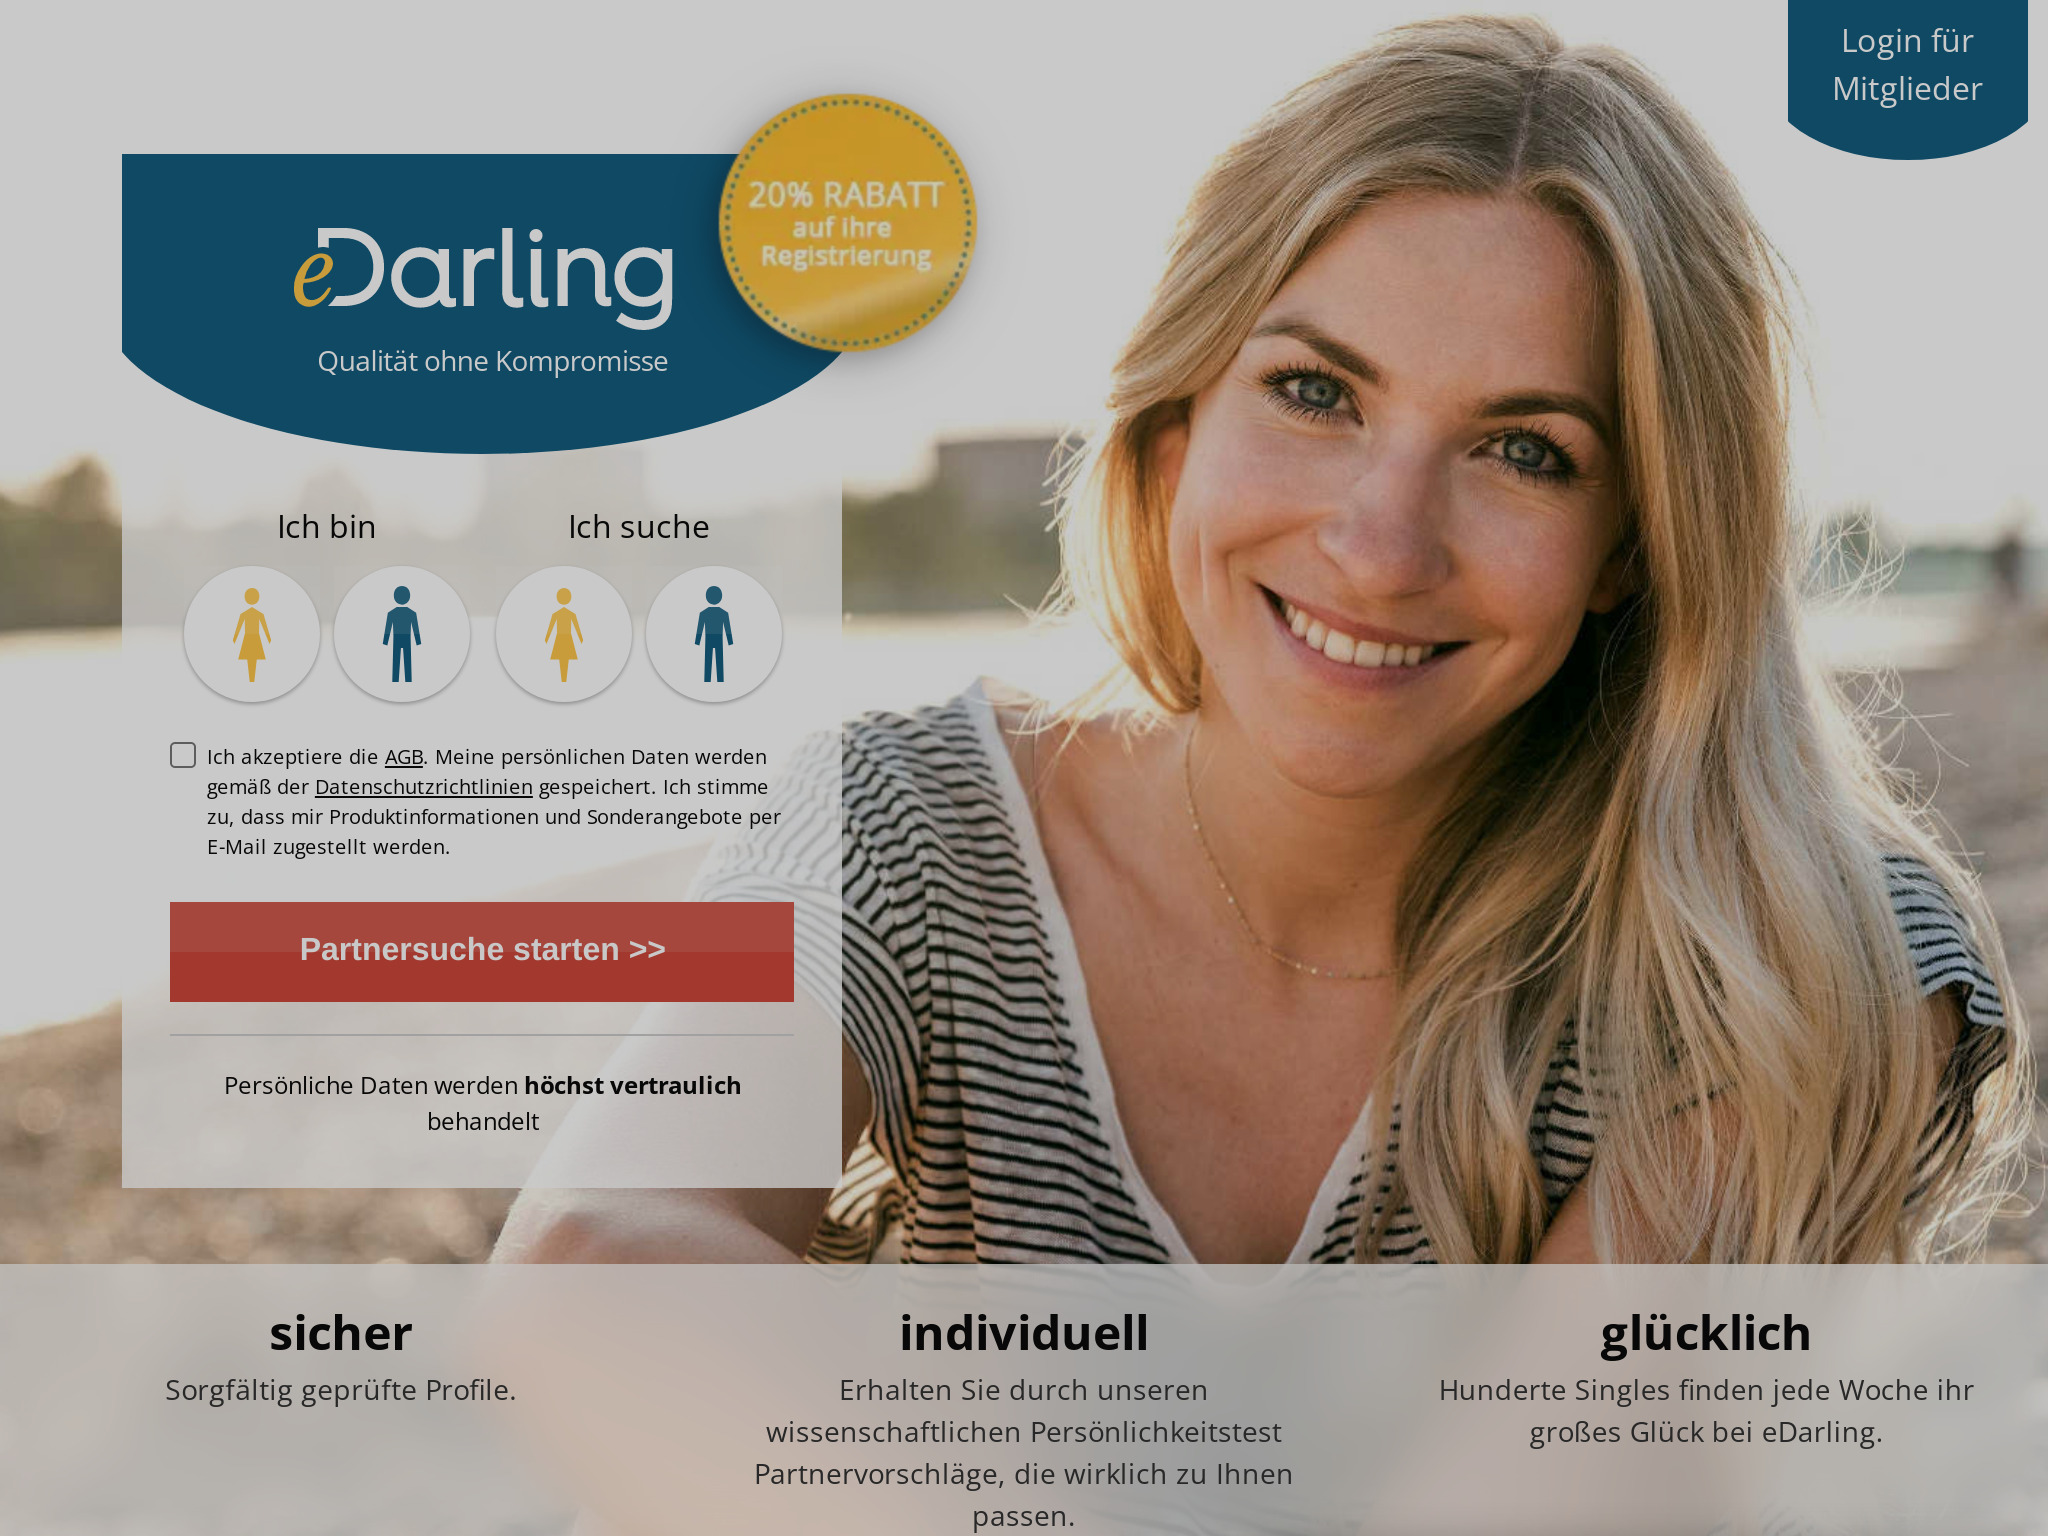 Seeking Something Special? – Check Our eDarling Review